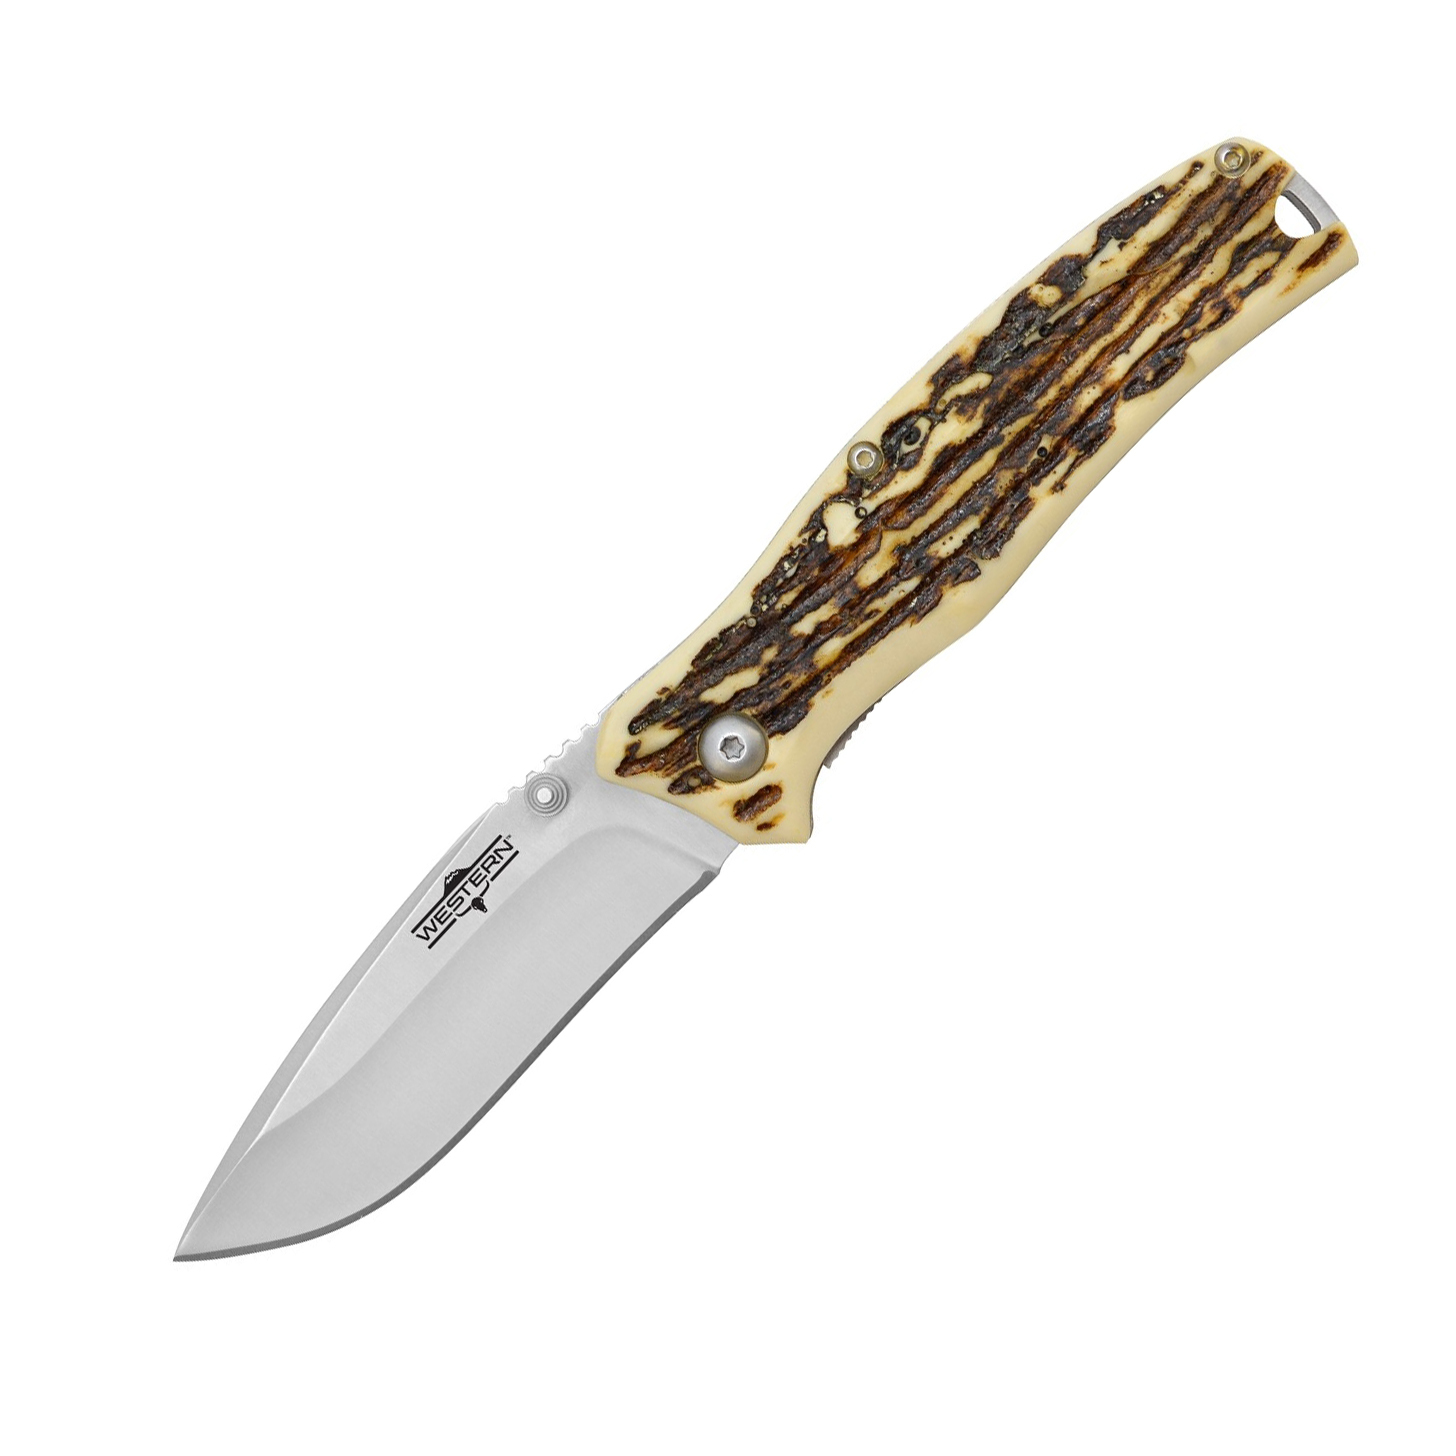   Camillus Western Pronto,  420 Stainless Steel,  Delrin